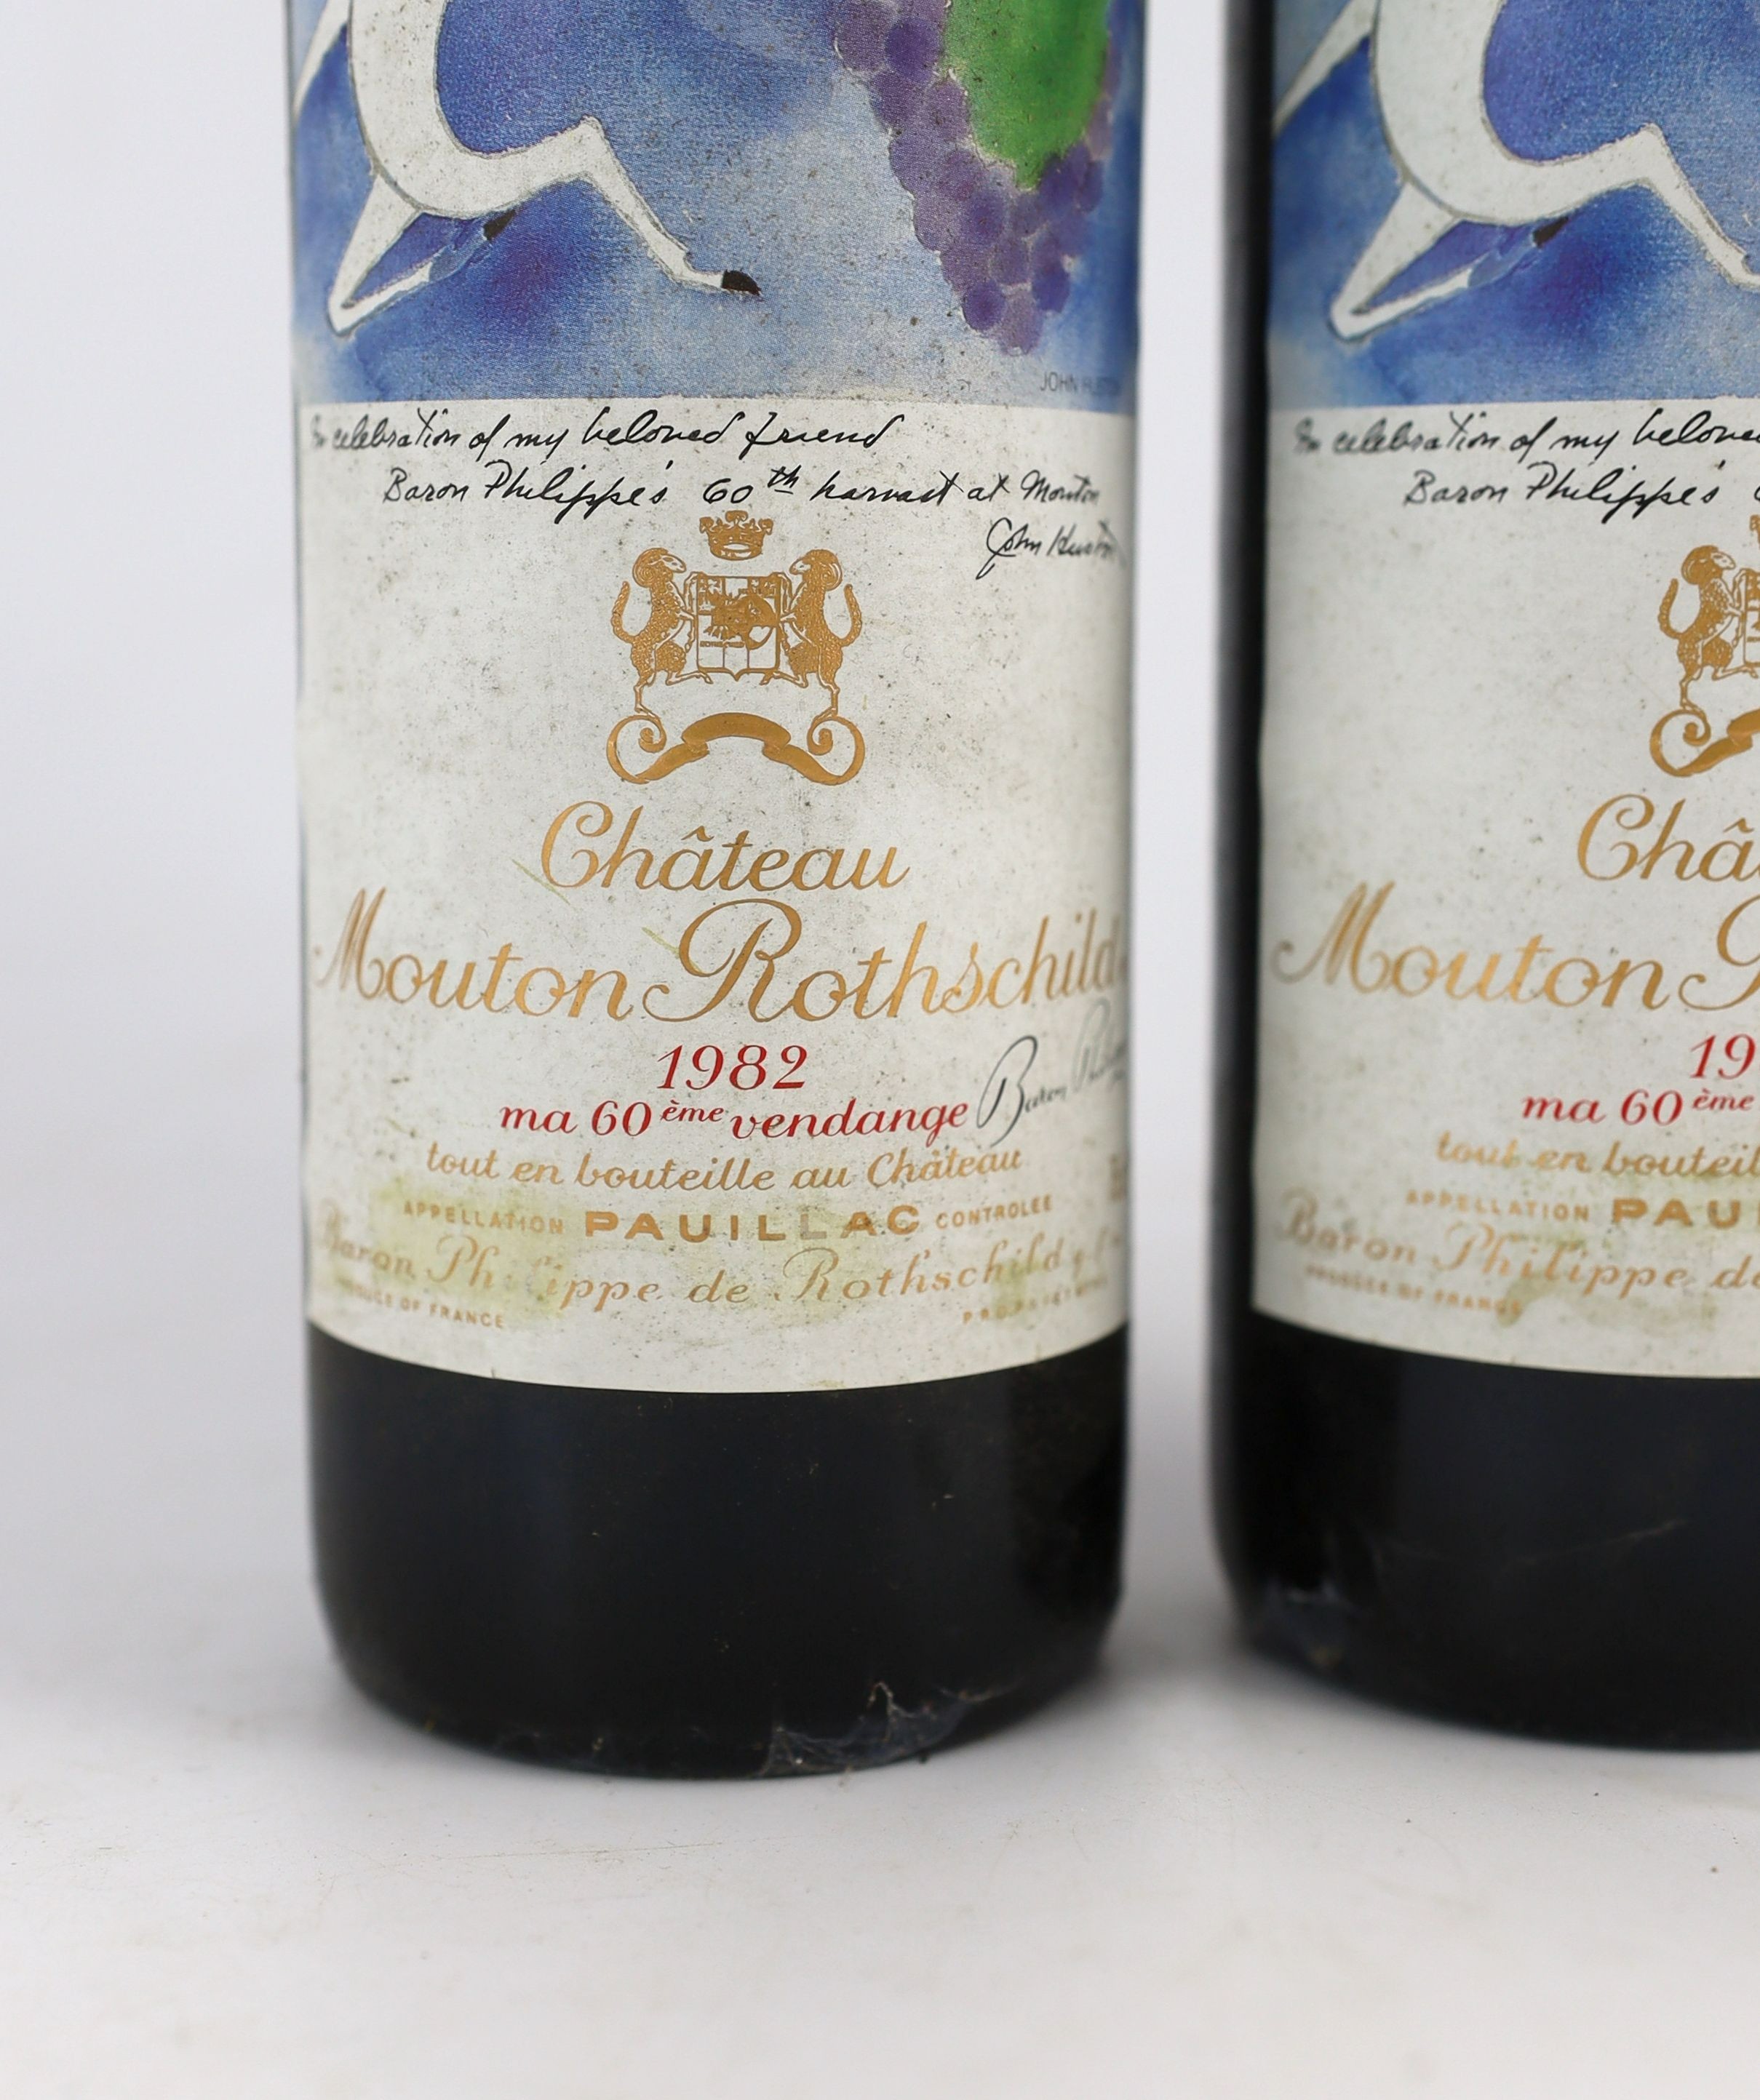 Two bottles of Chateau Mouton Rothschild 1982, height 30cm